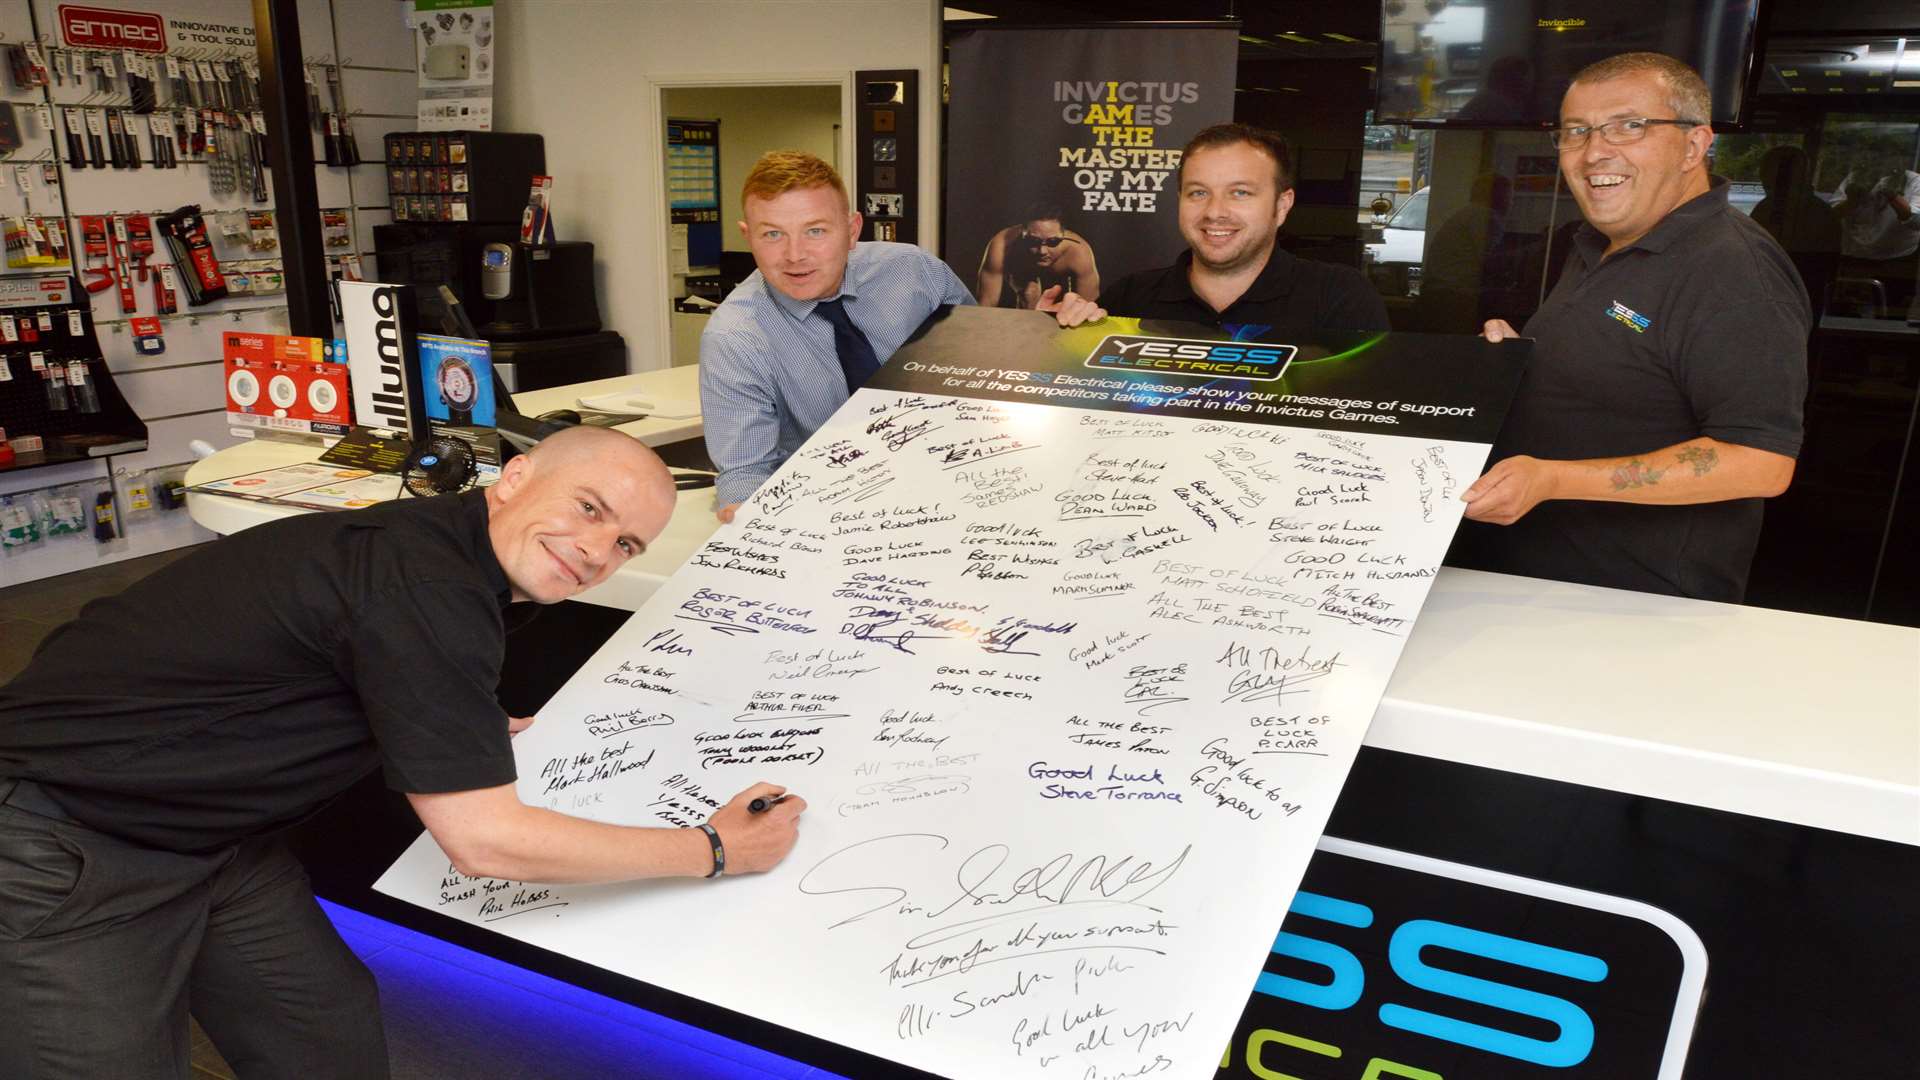 Members of staff at the Yesss electrical branch in Tunbridge Wells sign the giant good luck card